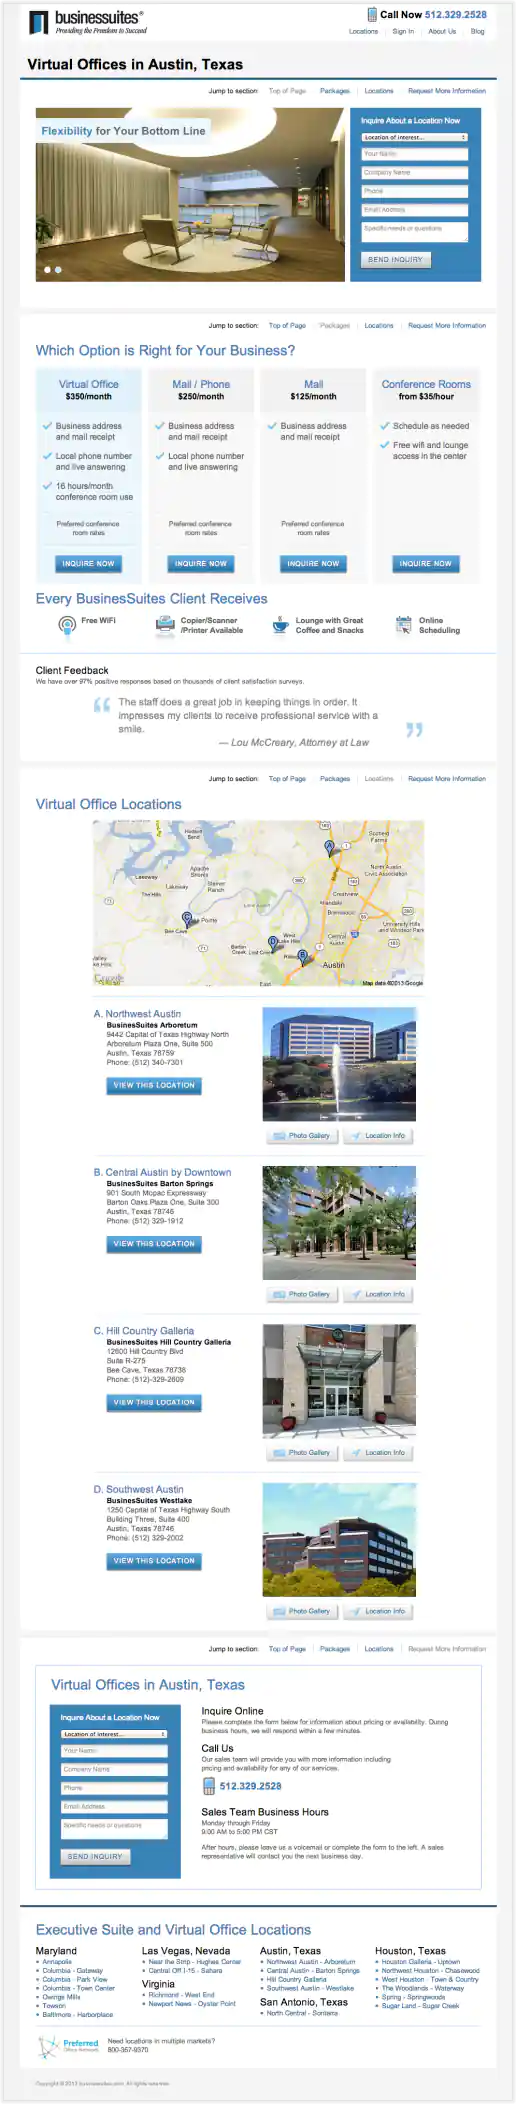 Virtual Offices Page - version 1